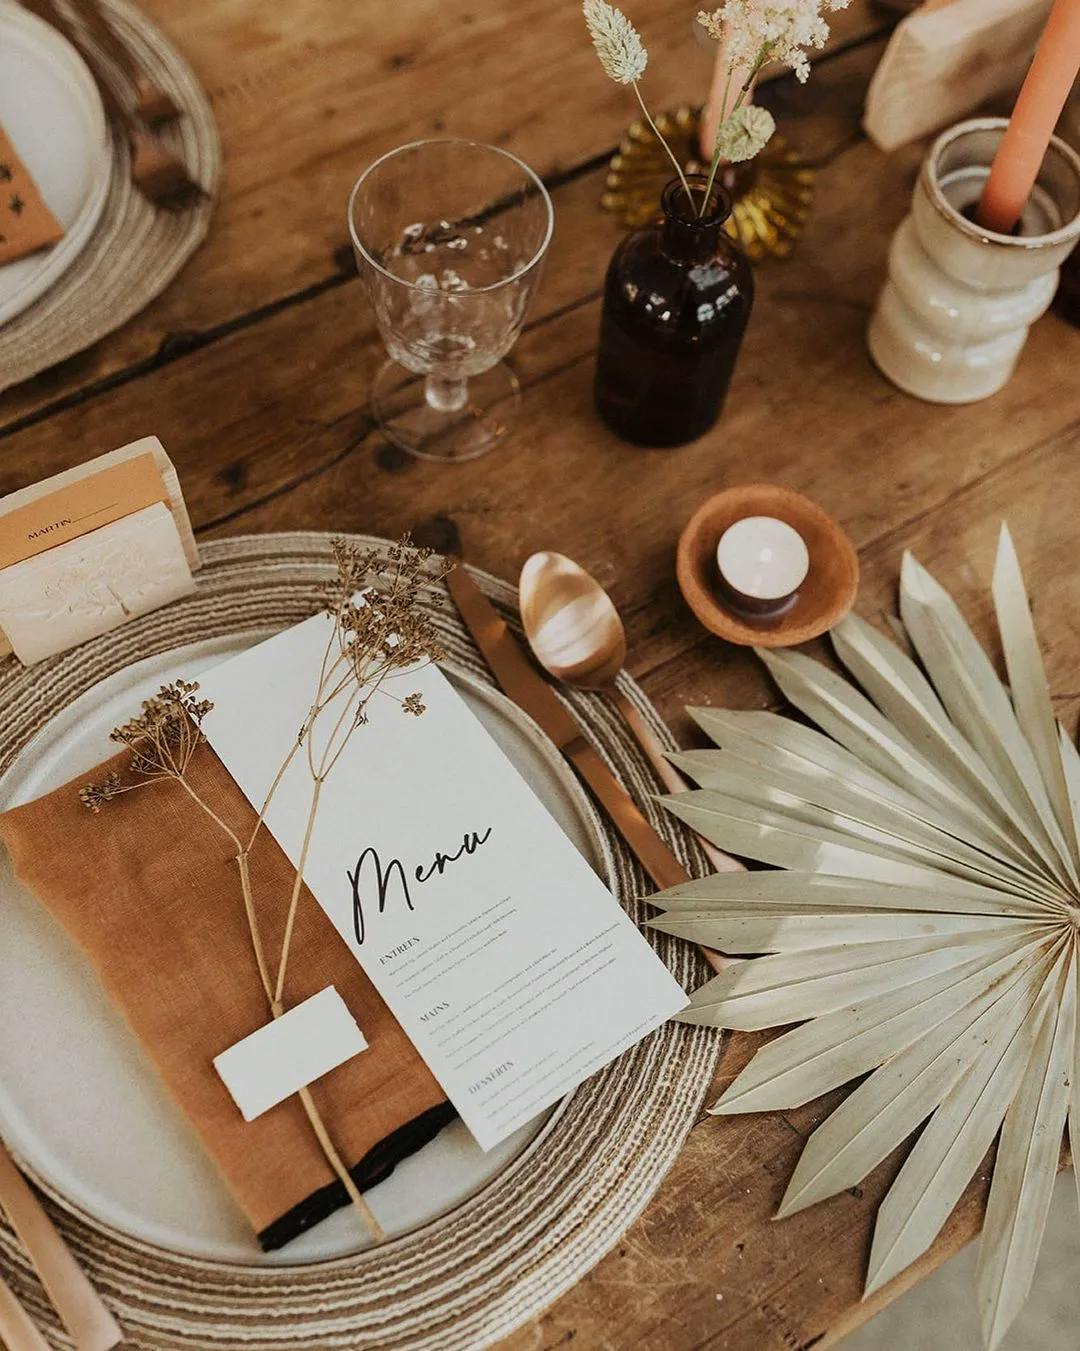 A rustic table setting features a white plate with a menu, a folded brown napkin, and dried botanical accents. Nearby are a clear glass, brown bottle with dried flowers, candleholder, and a dried palm leaf on the right side of the wooden table.